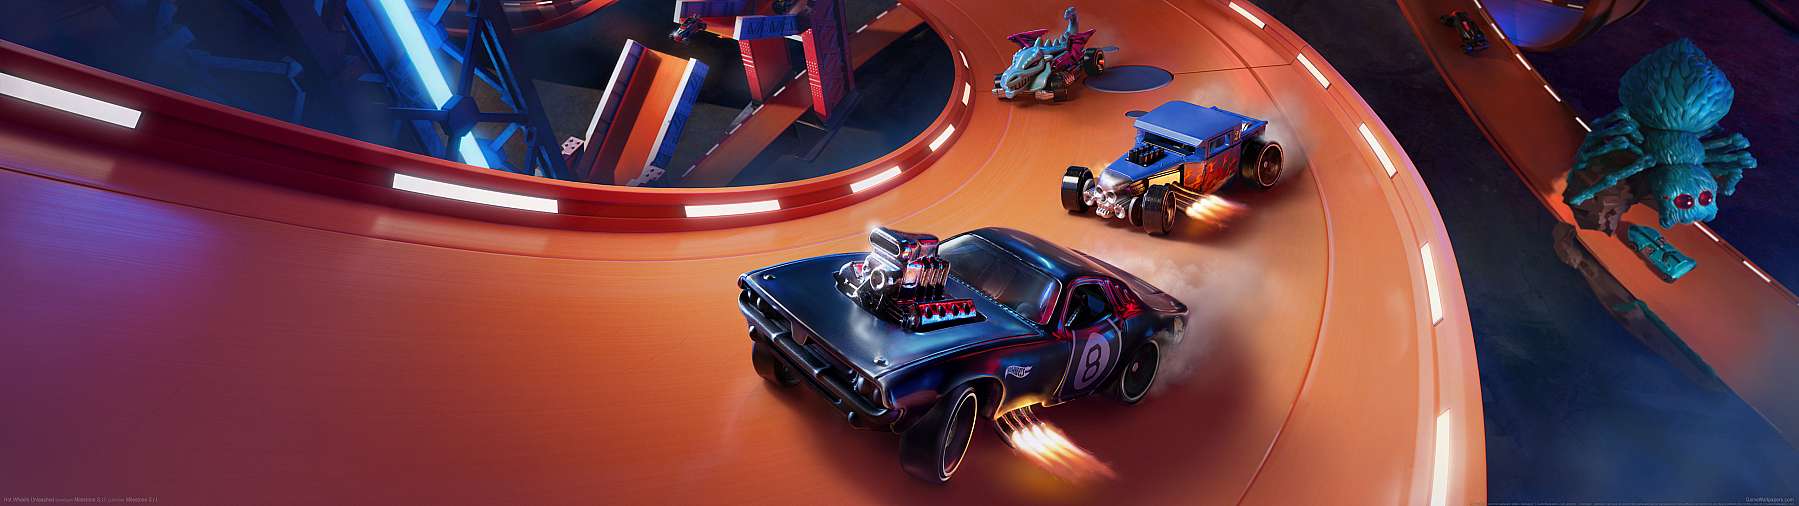 Hot Wheels Unleashed wallpaper or background